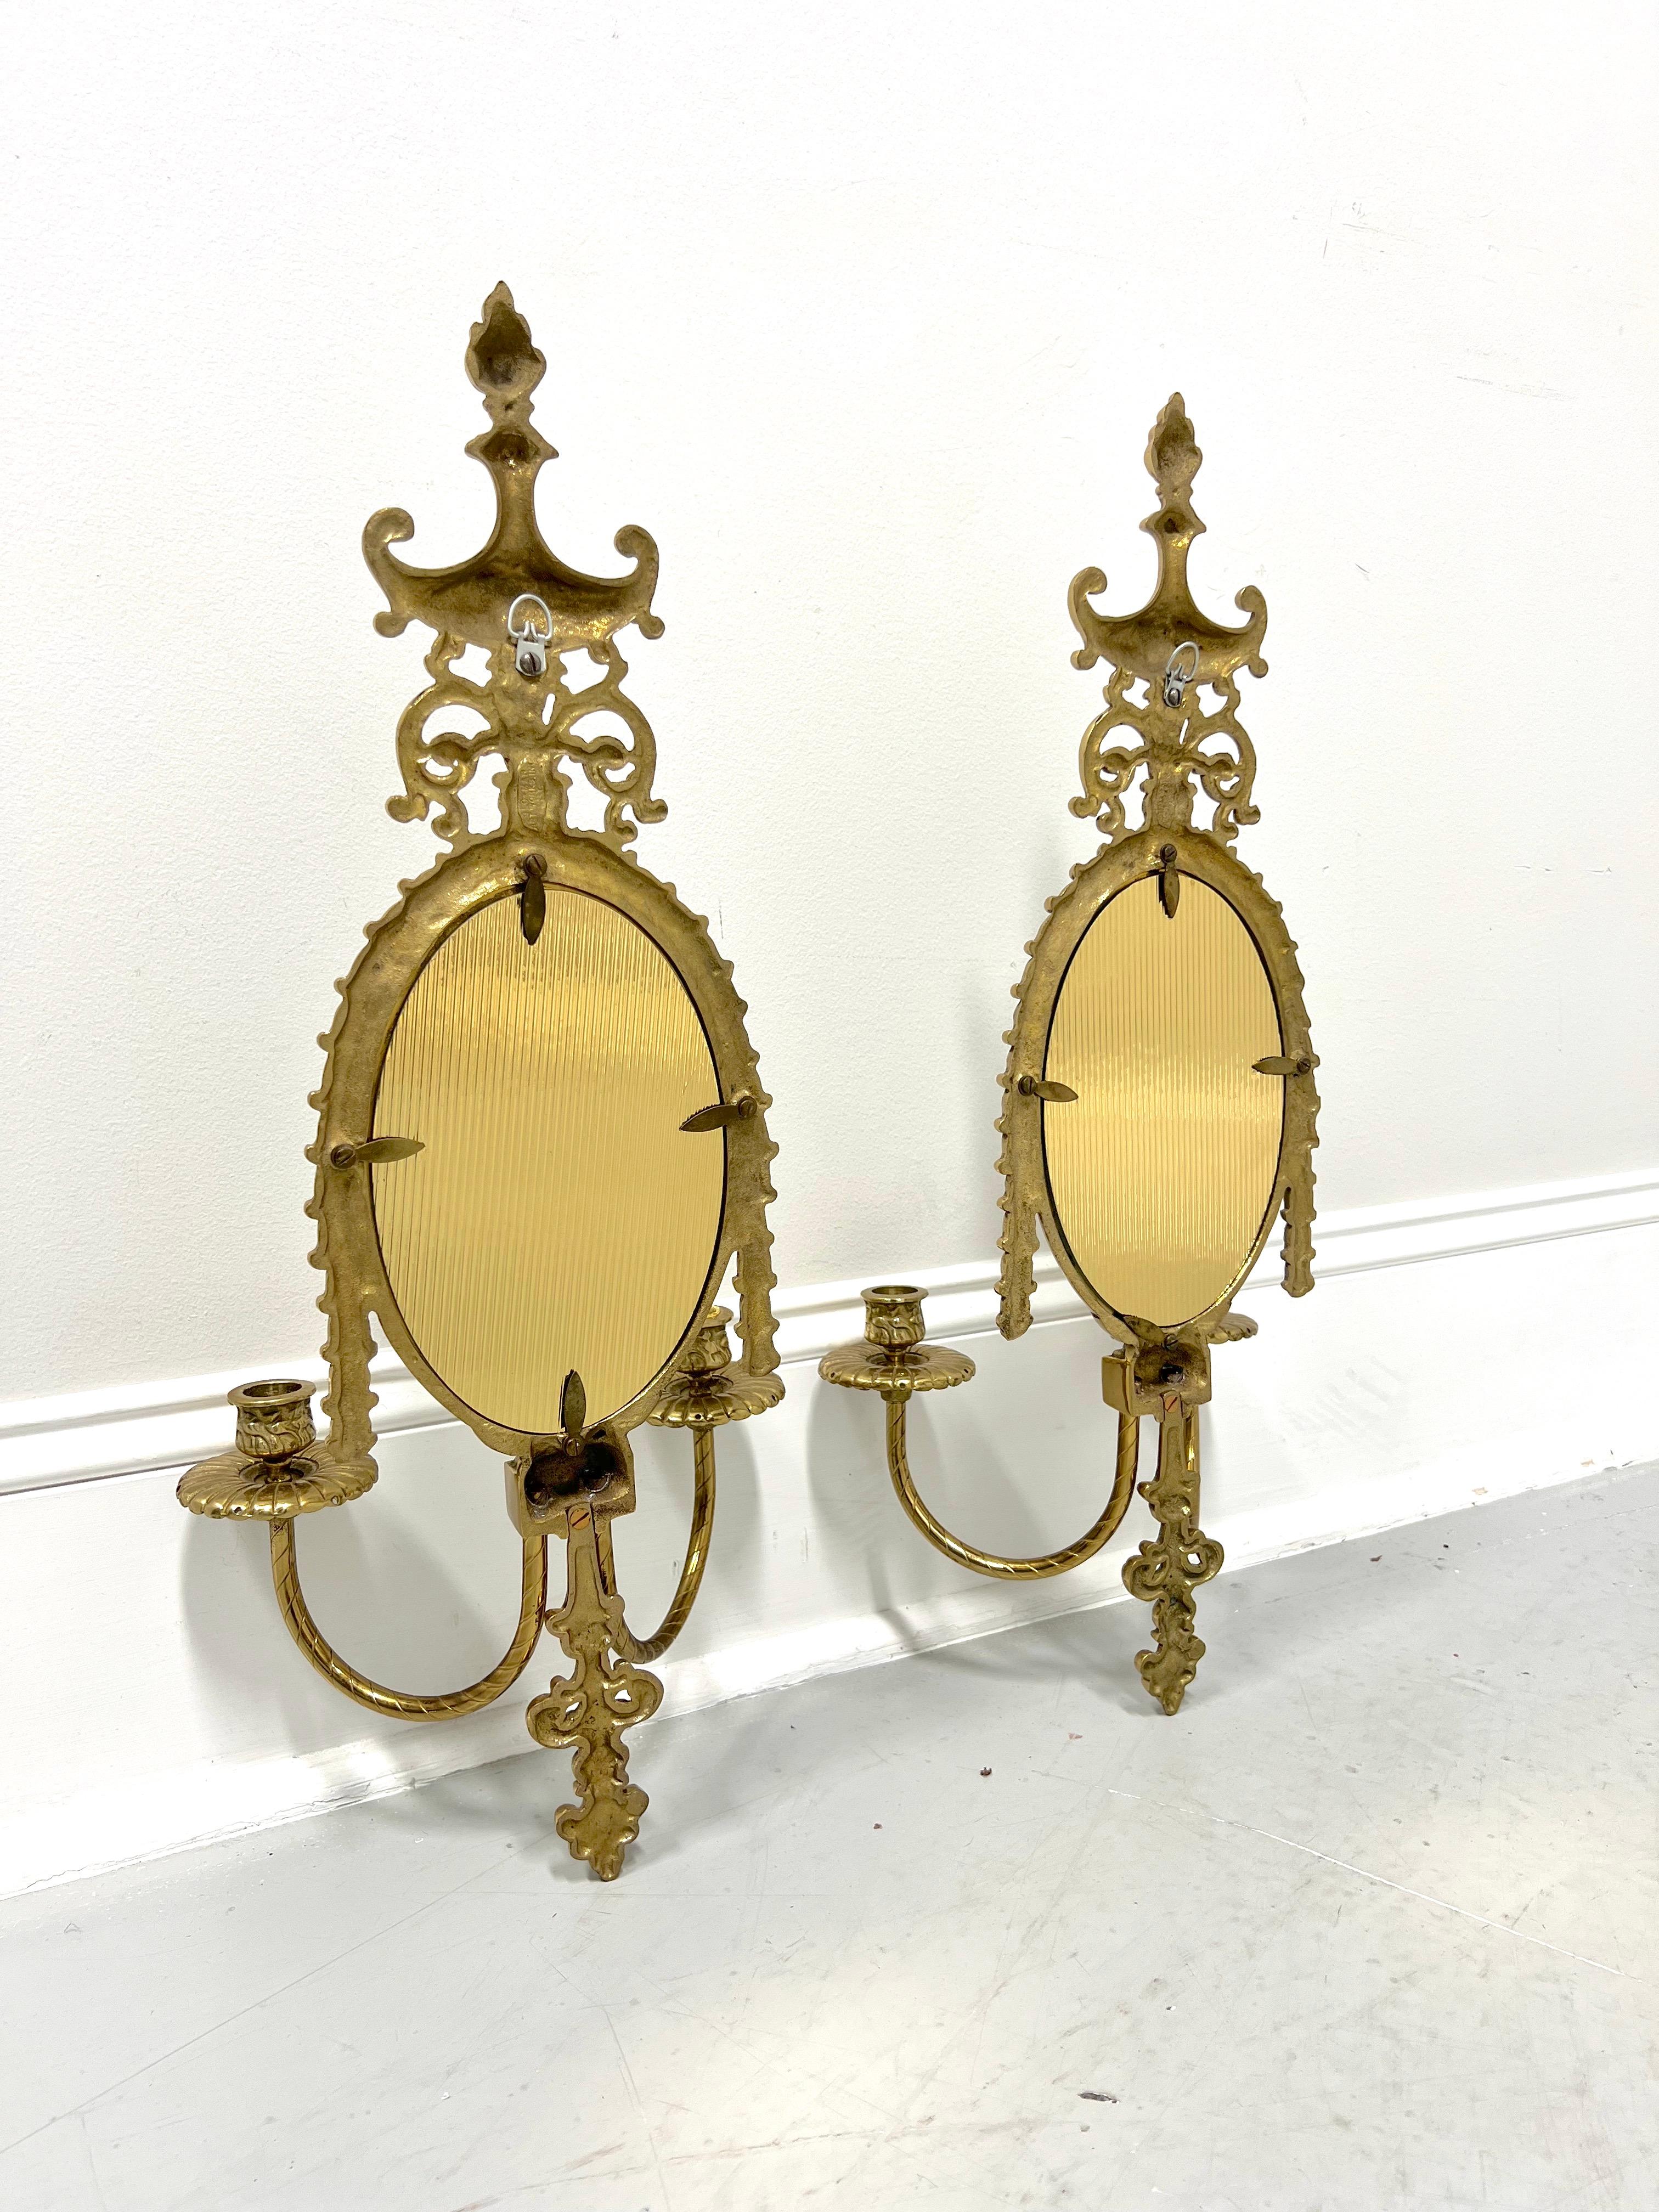 GLO-MAR ARTWORKS Mid 20th Century Brass French Provincial Candle Sconces - Pair For Sale 4